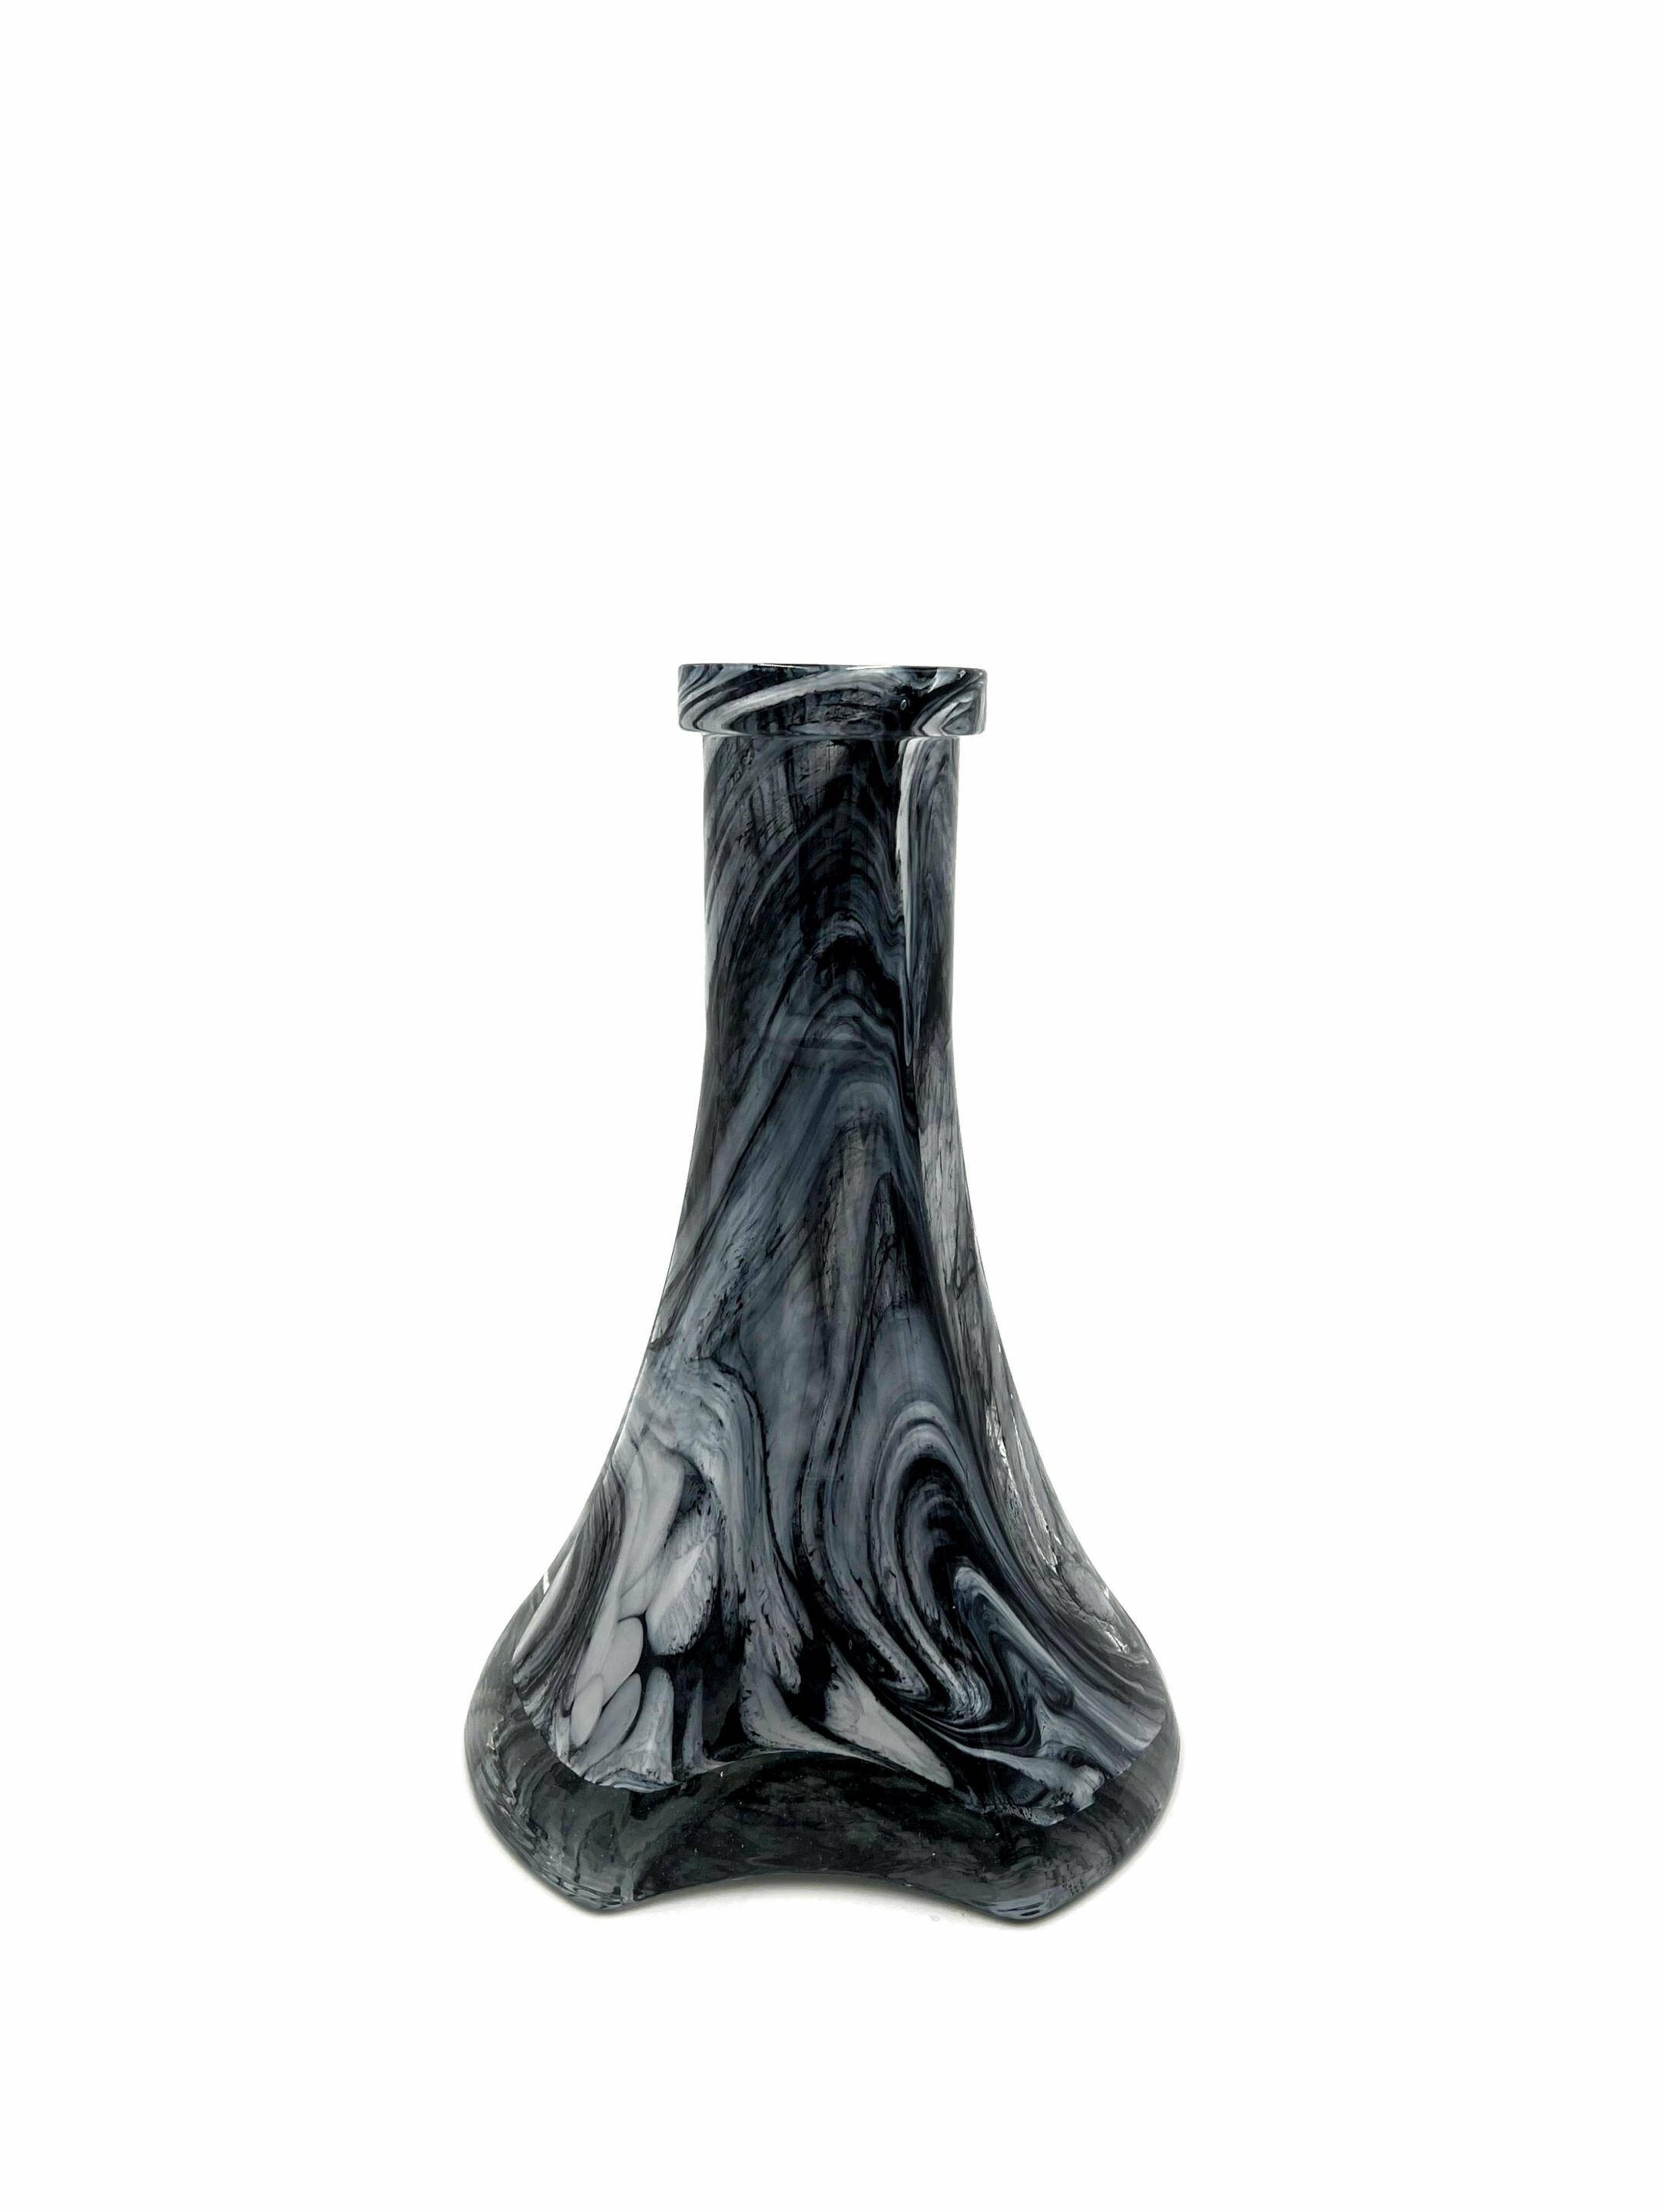 Glass base VG Pyramid Black and White Marble